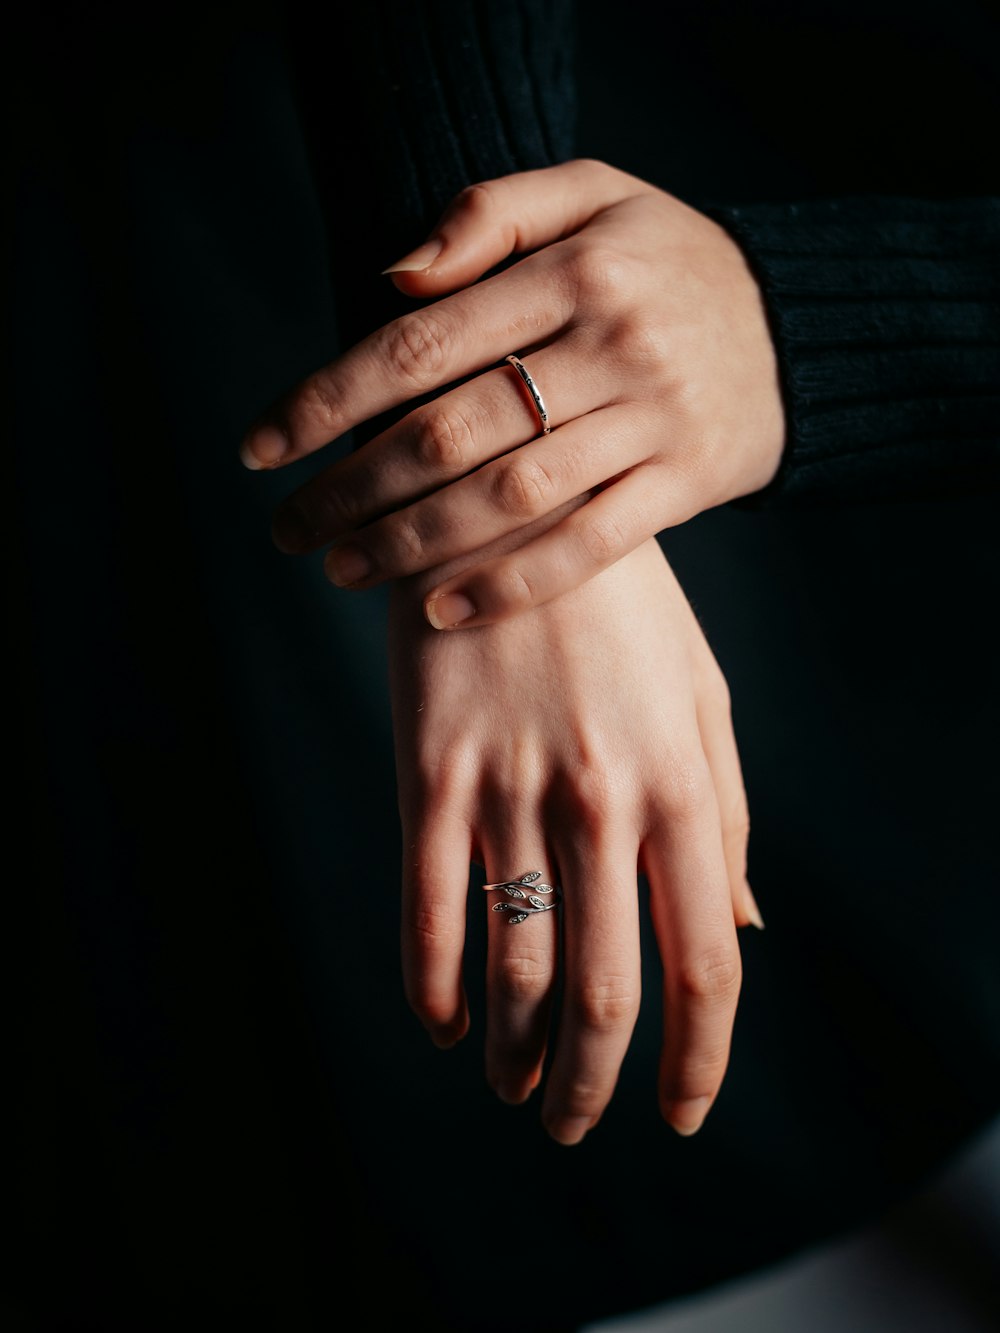 person wearing silver ring and ring